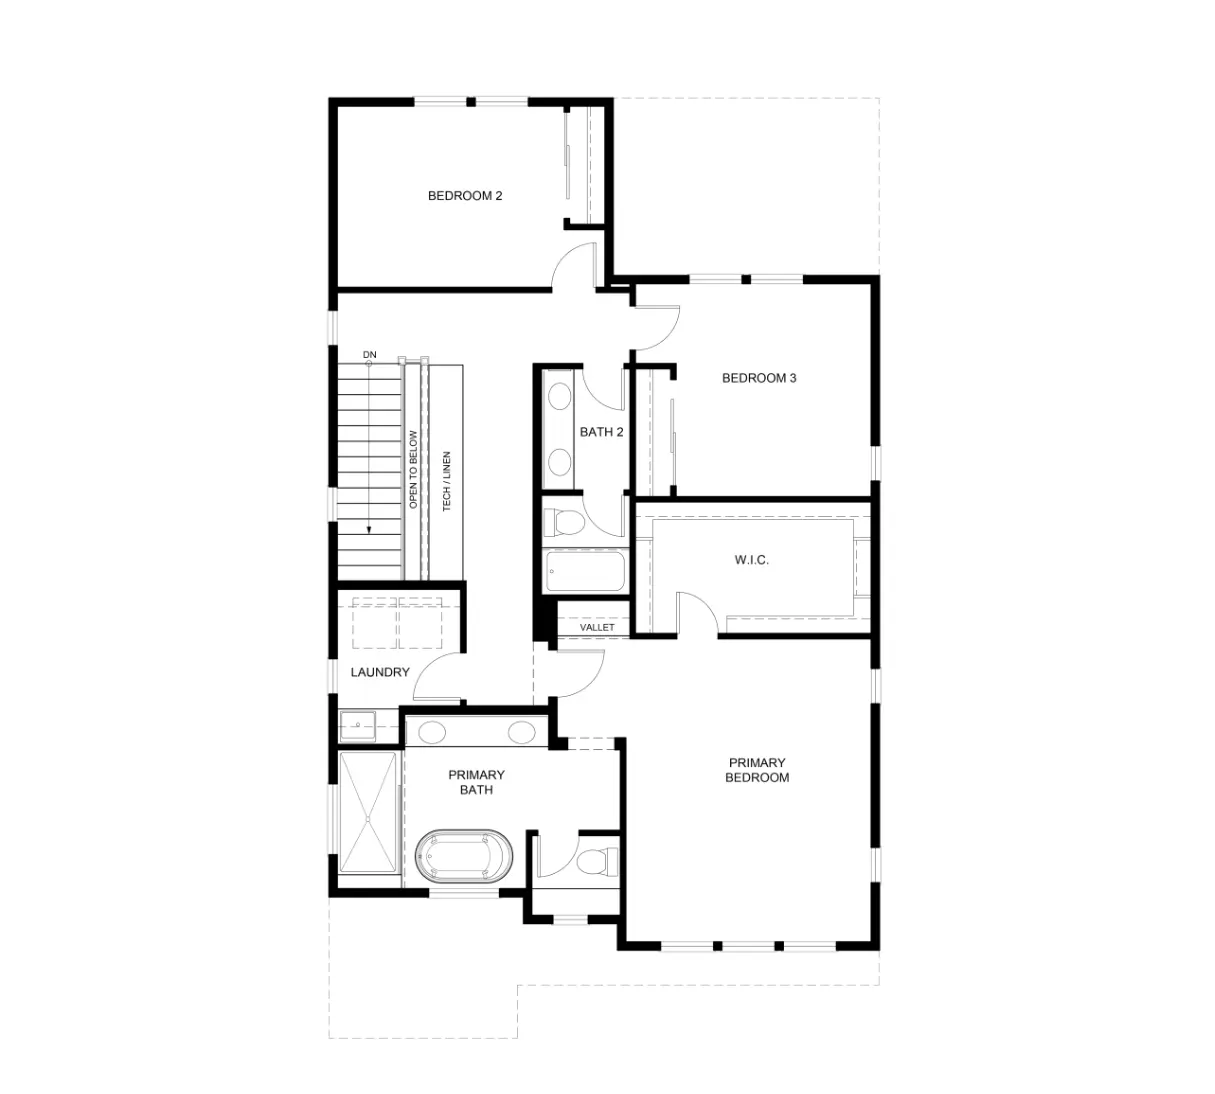 Second floor of the 1A Floor Plan of Enclave at Walnut Boulevard in Walnut Creek designed and built by boutique homebuilders, Haven Development